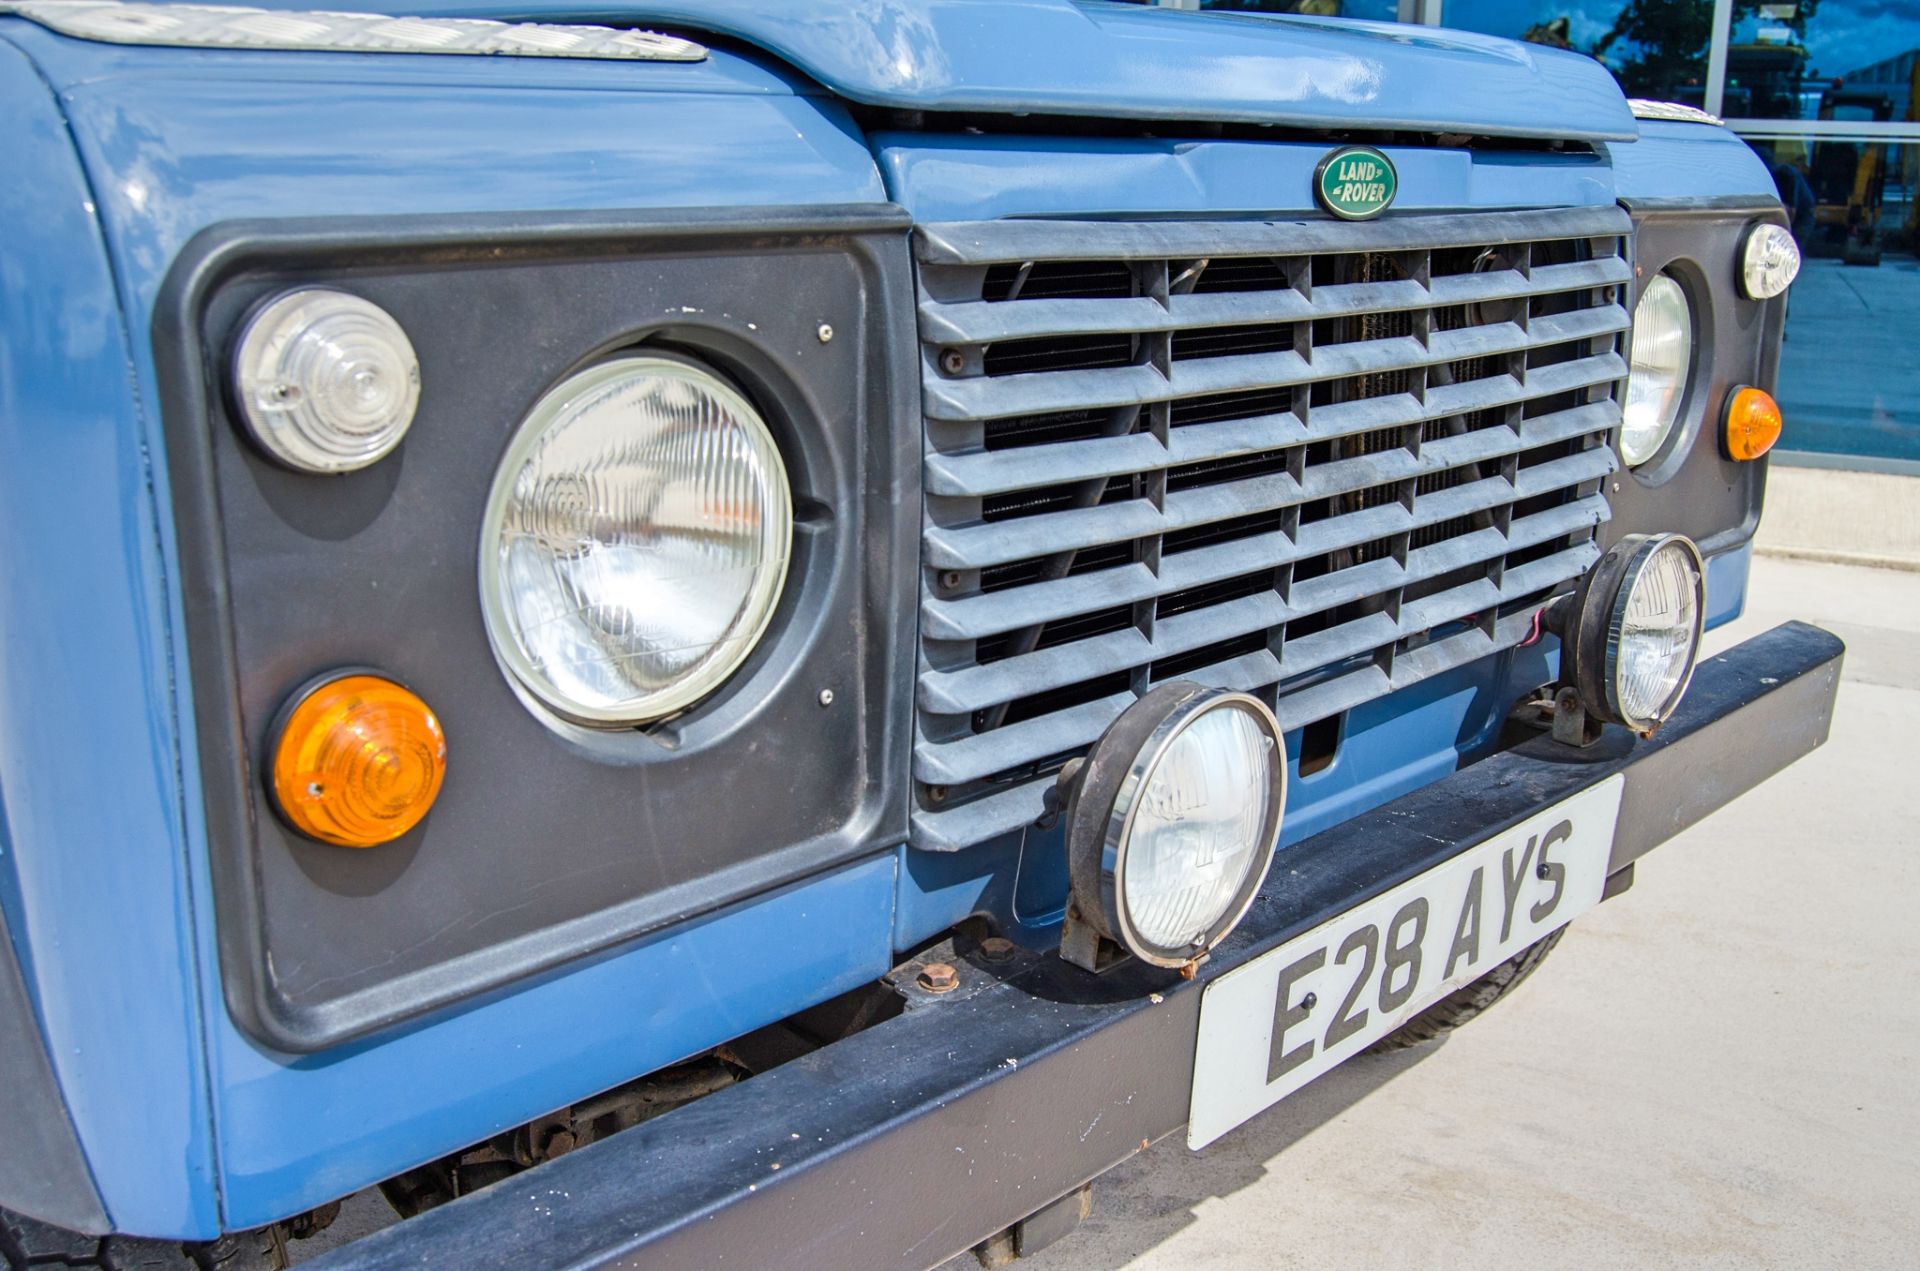 Land Rover 90 2.5 200 Tdi diesel 4wd utility vehicle Registration Number: E28 AYS Date of - Image 17 of 42